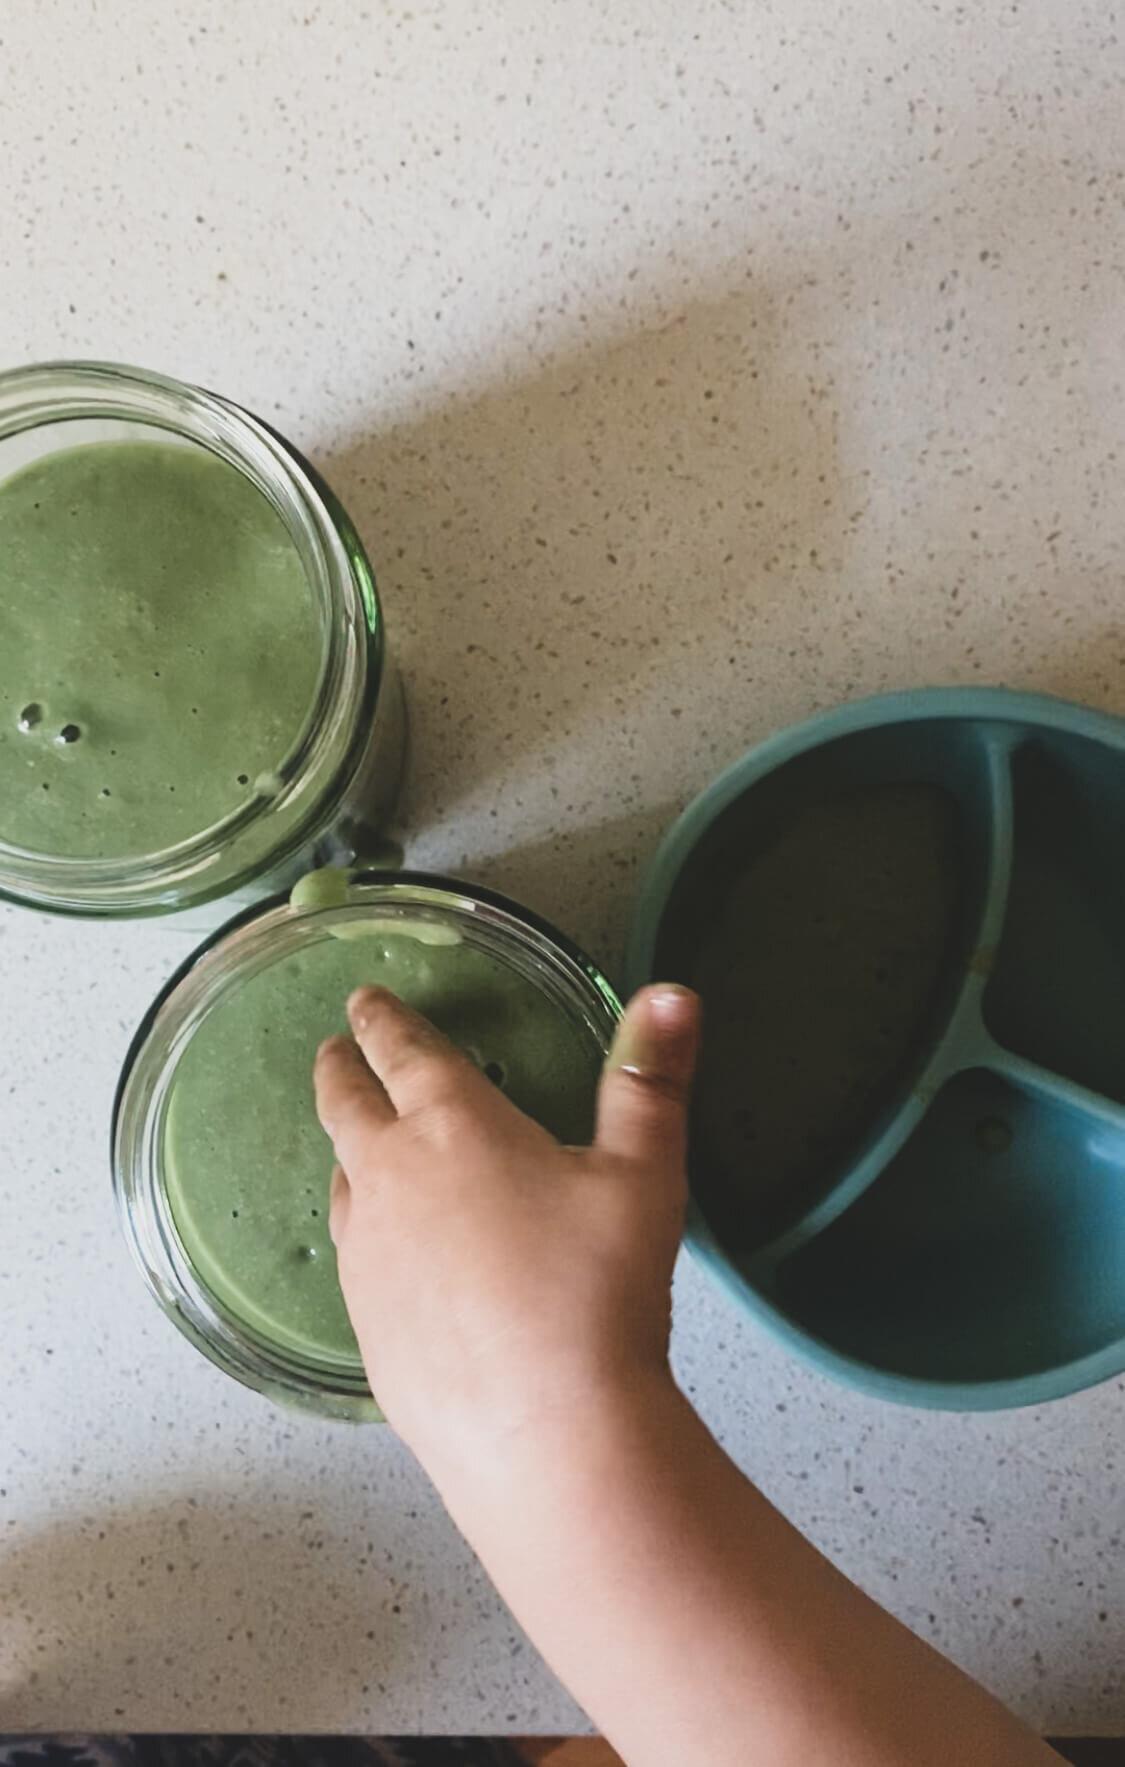 Simple-healthy-Green-smoothie-recipe-1-lunch-lady-lou.JPG